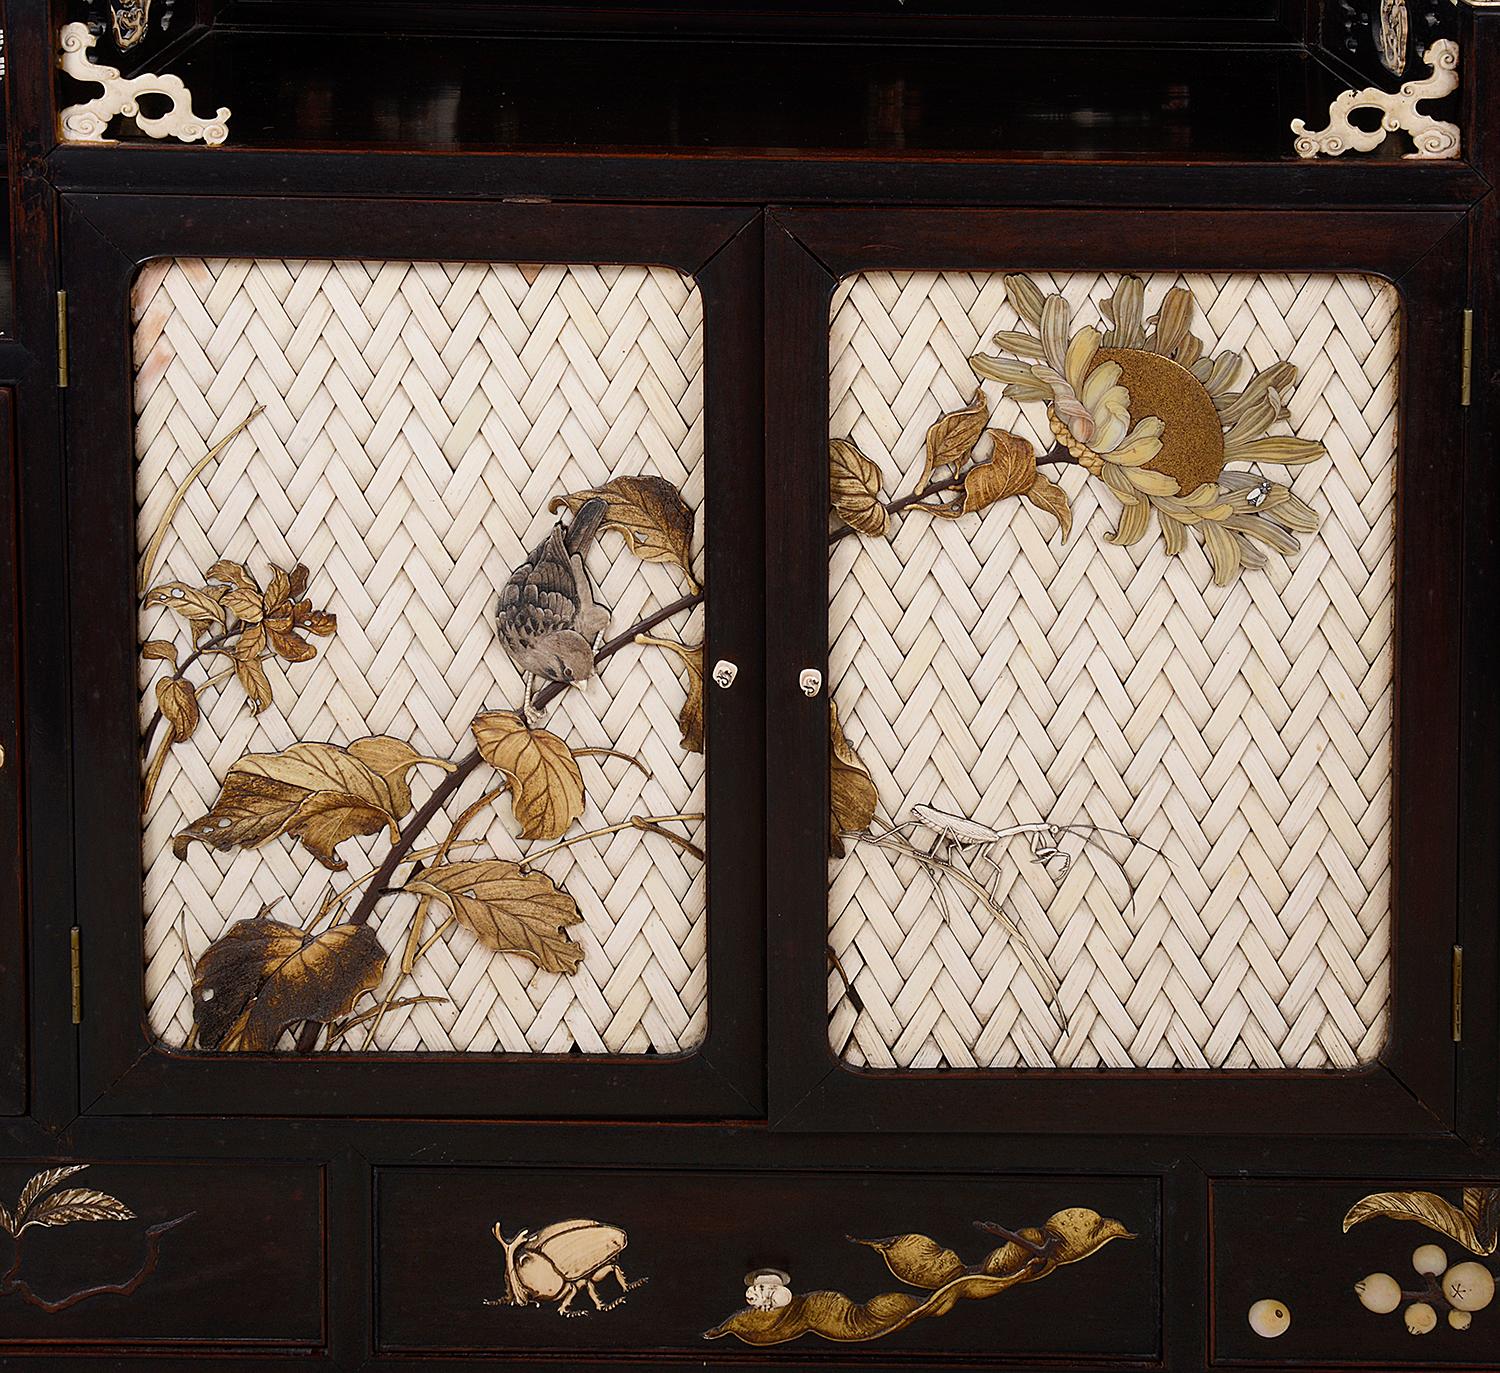 19th Century Rare and Important Japanese Meiji Period Shadona, circa 1890 For Sale